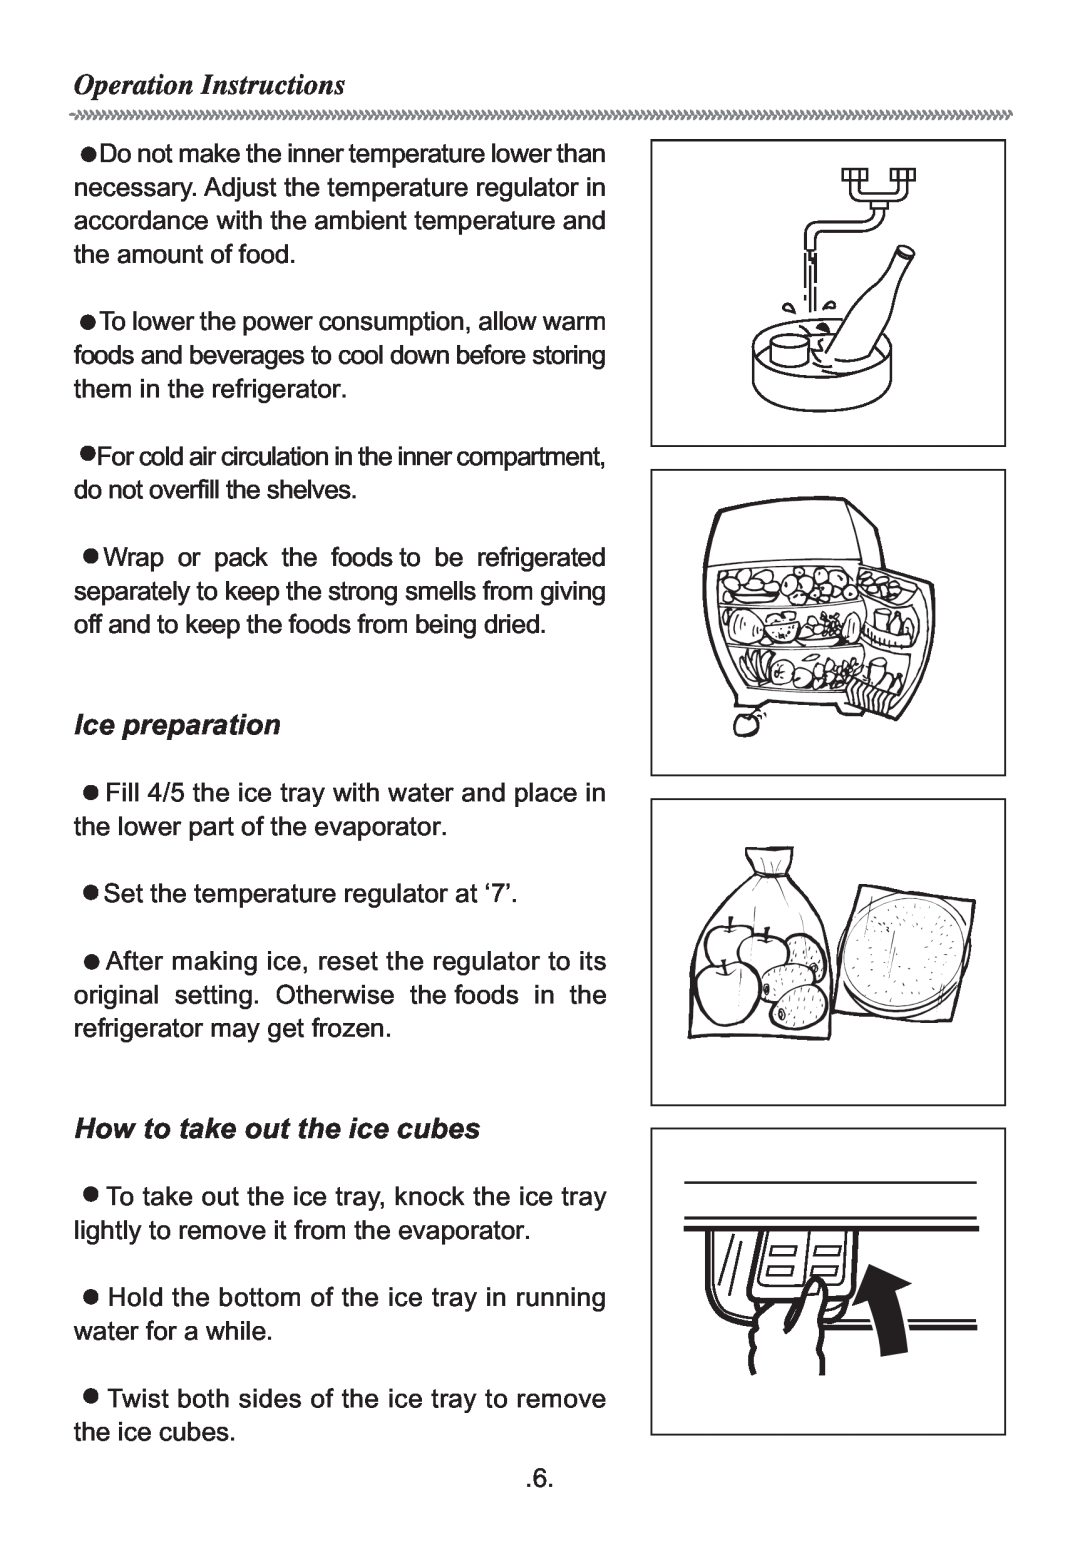 Haier HR-155S manual Operation Instructions, Ice preparation, How to take out the ice cubes 